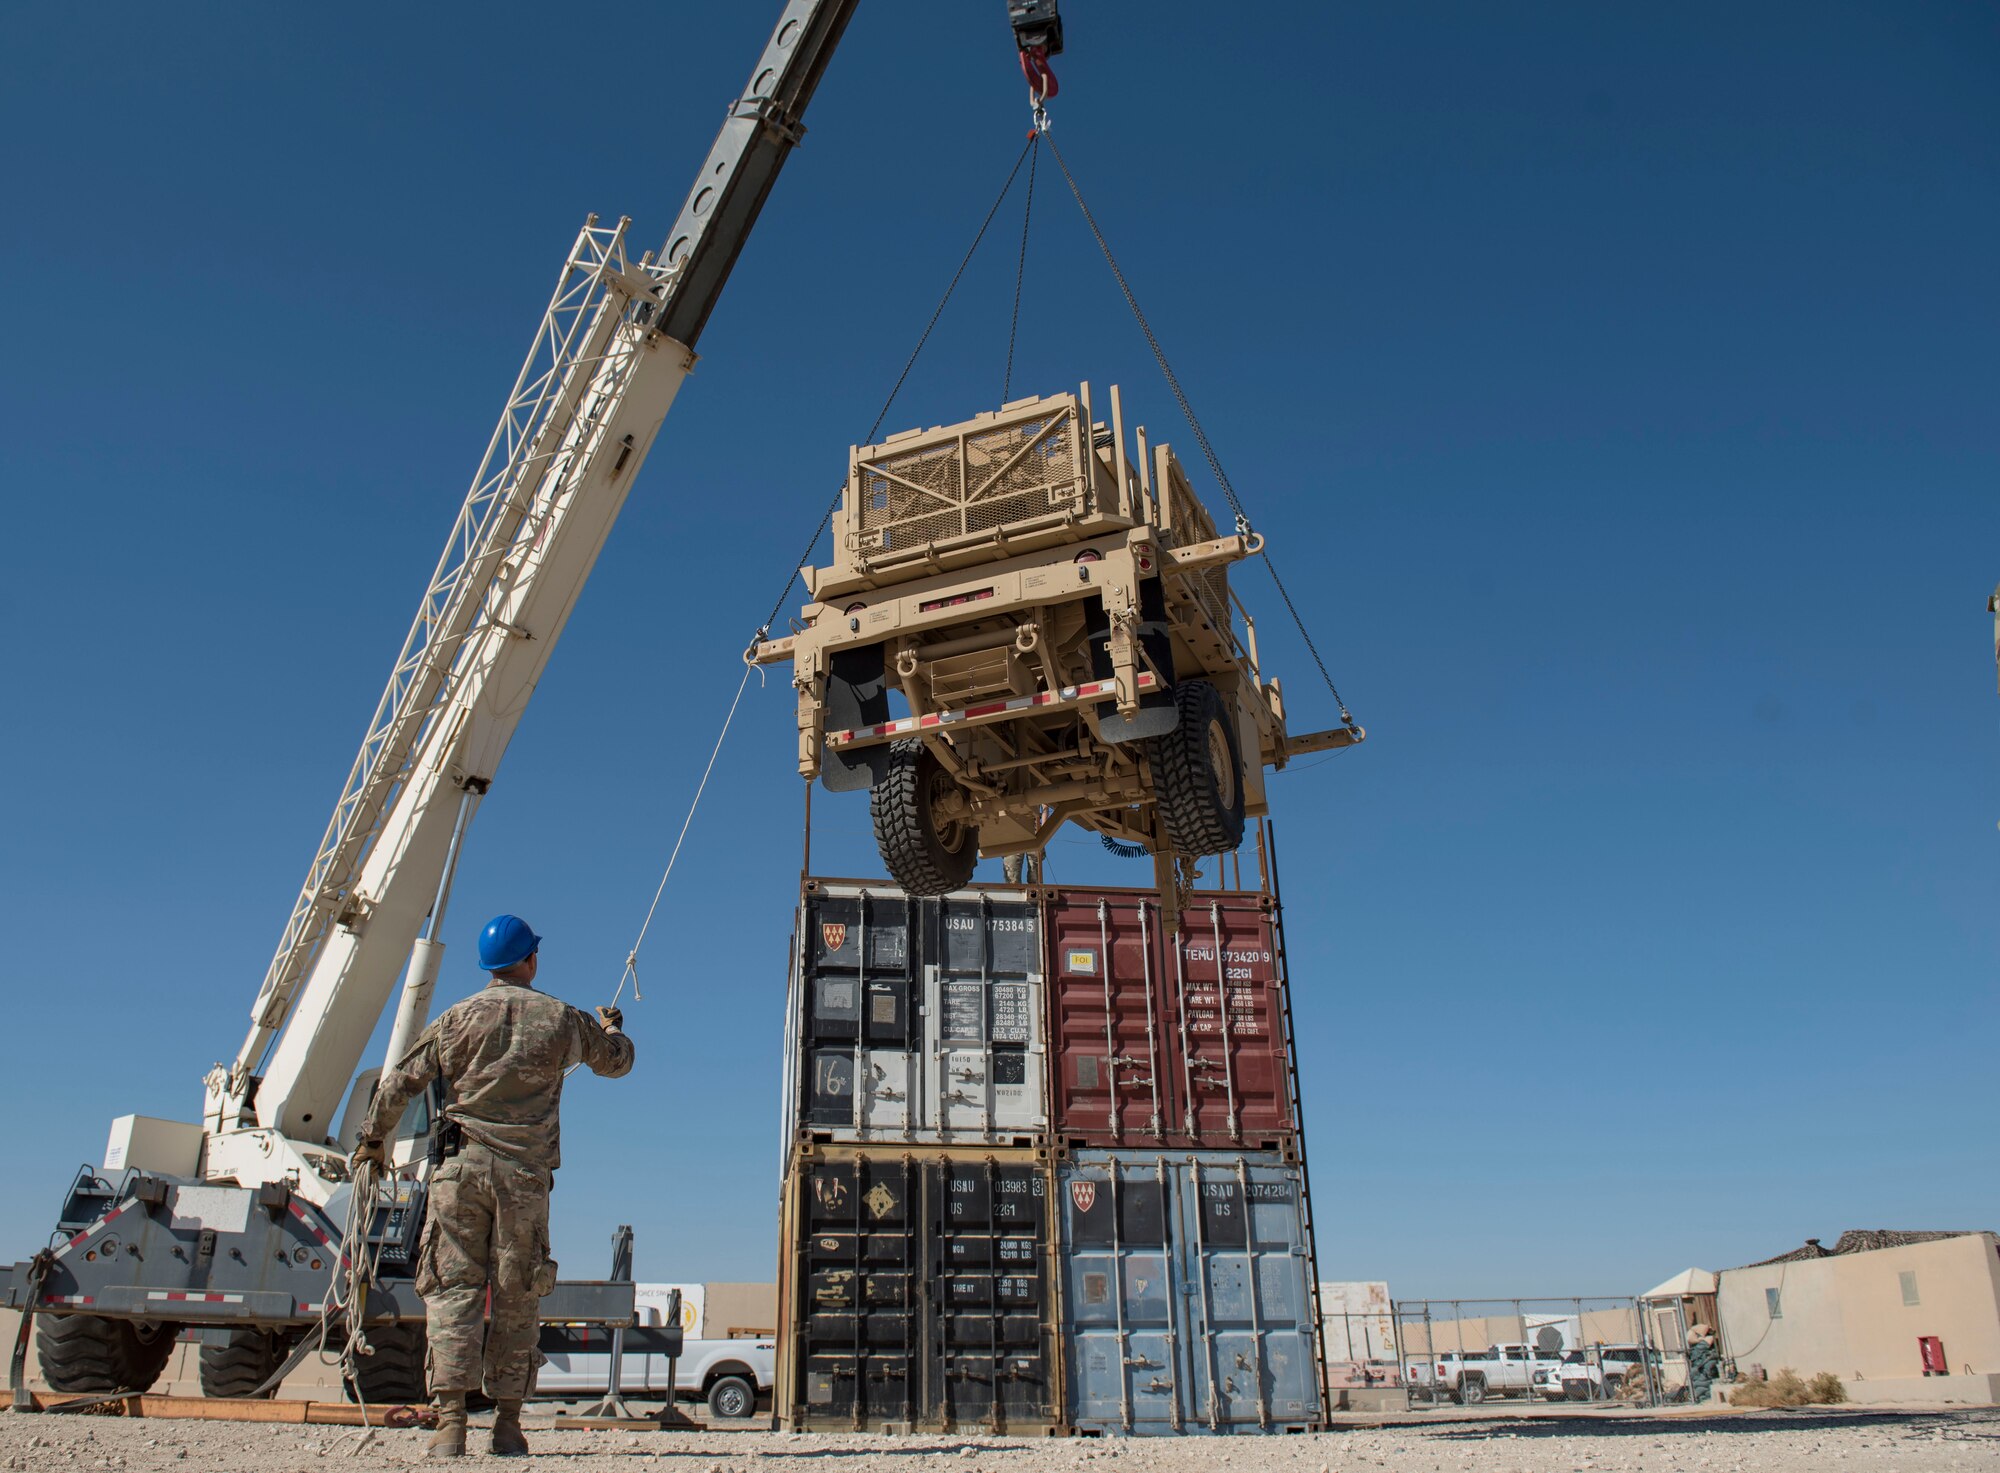 U.S. Air Force Airmen assigned to the 386th Expeditionary Civil Engineer Squadron pavement and heavy equipment operator unit lift an AN/MQP-64 Sentinel radar system at Ali Al Salem Air Base, Kuwait, Nov. 23, 2020.